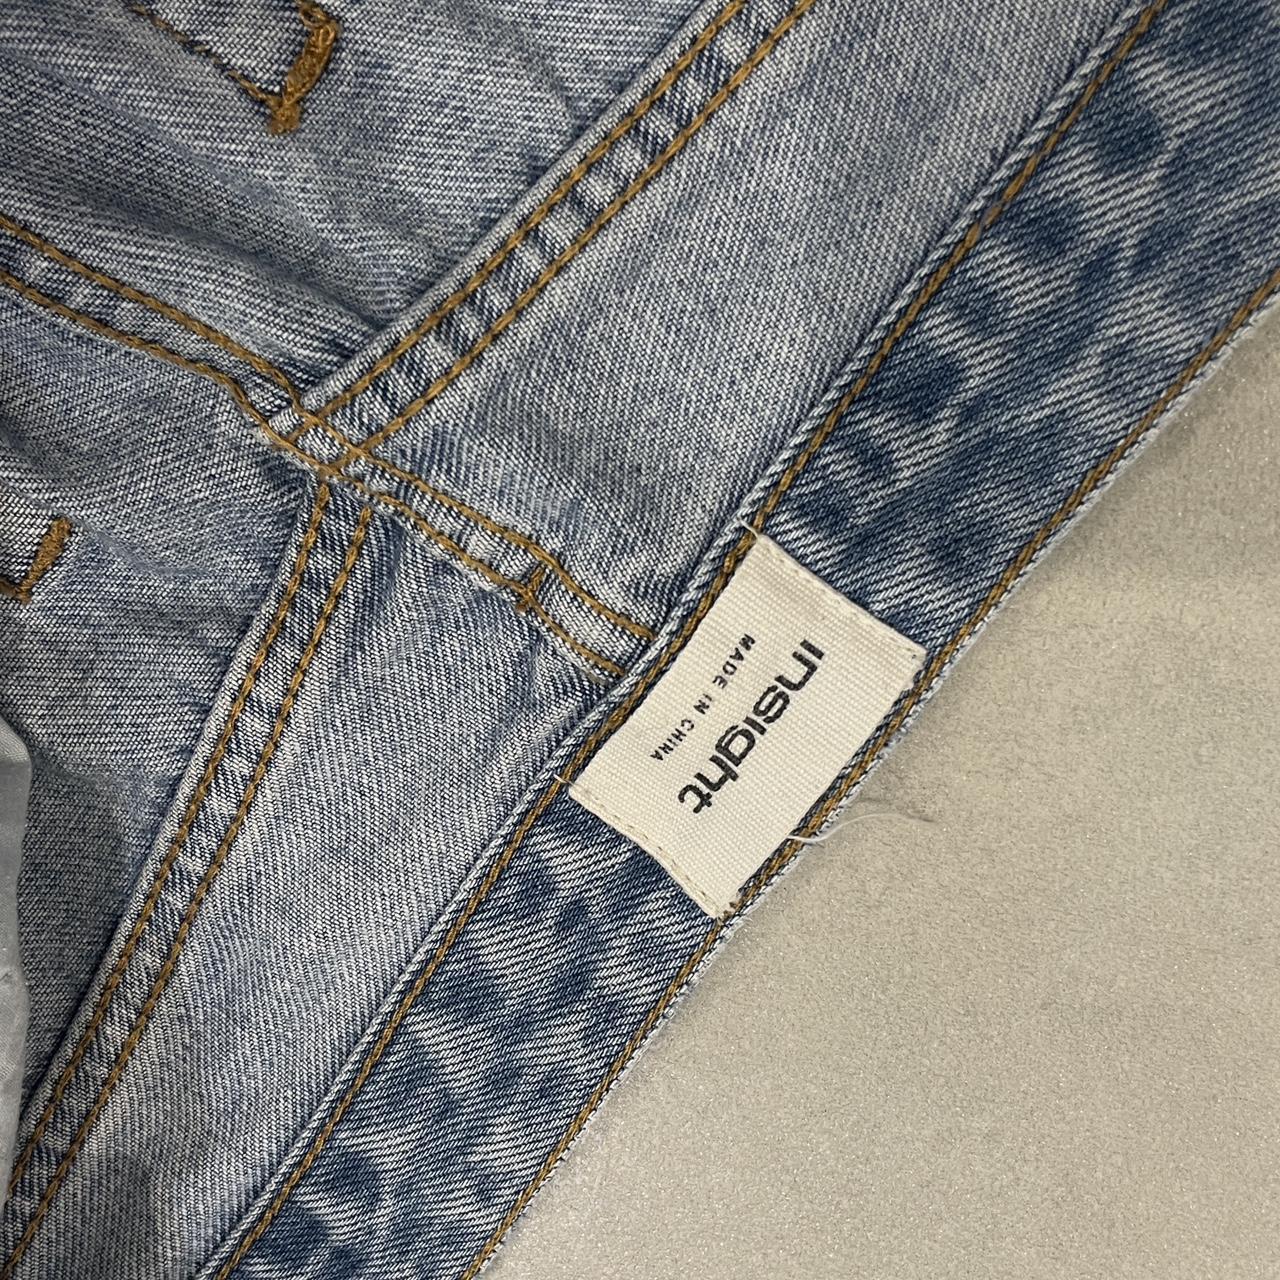 Insight Jeans Hardly worn: Size S - Fits 8-10... - Depop